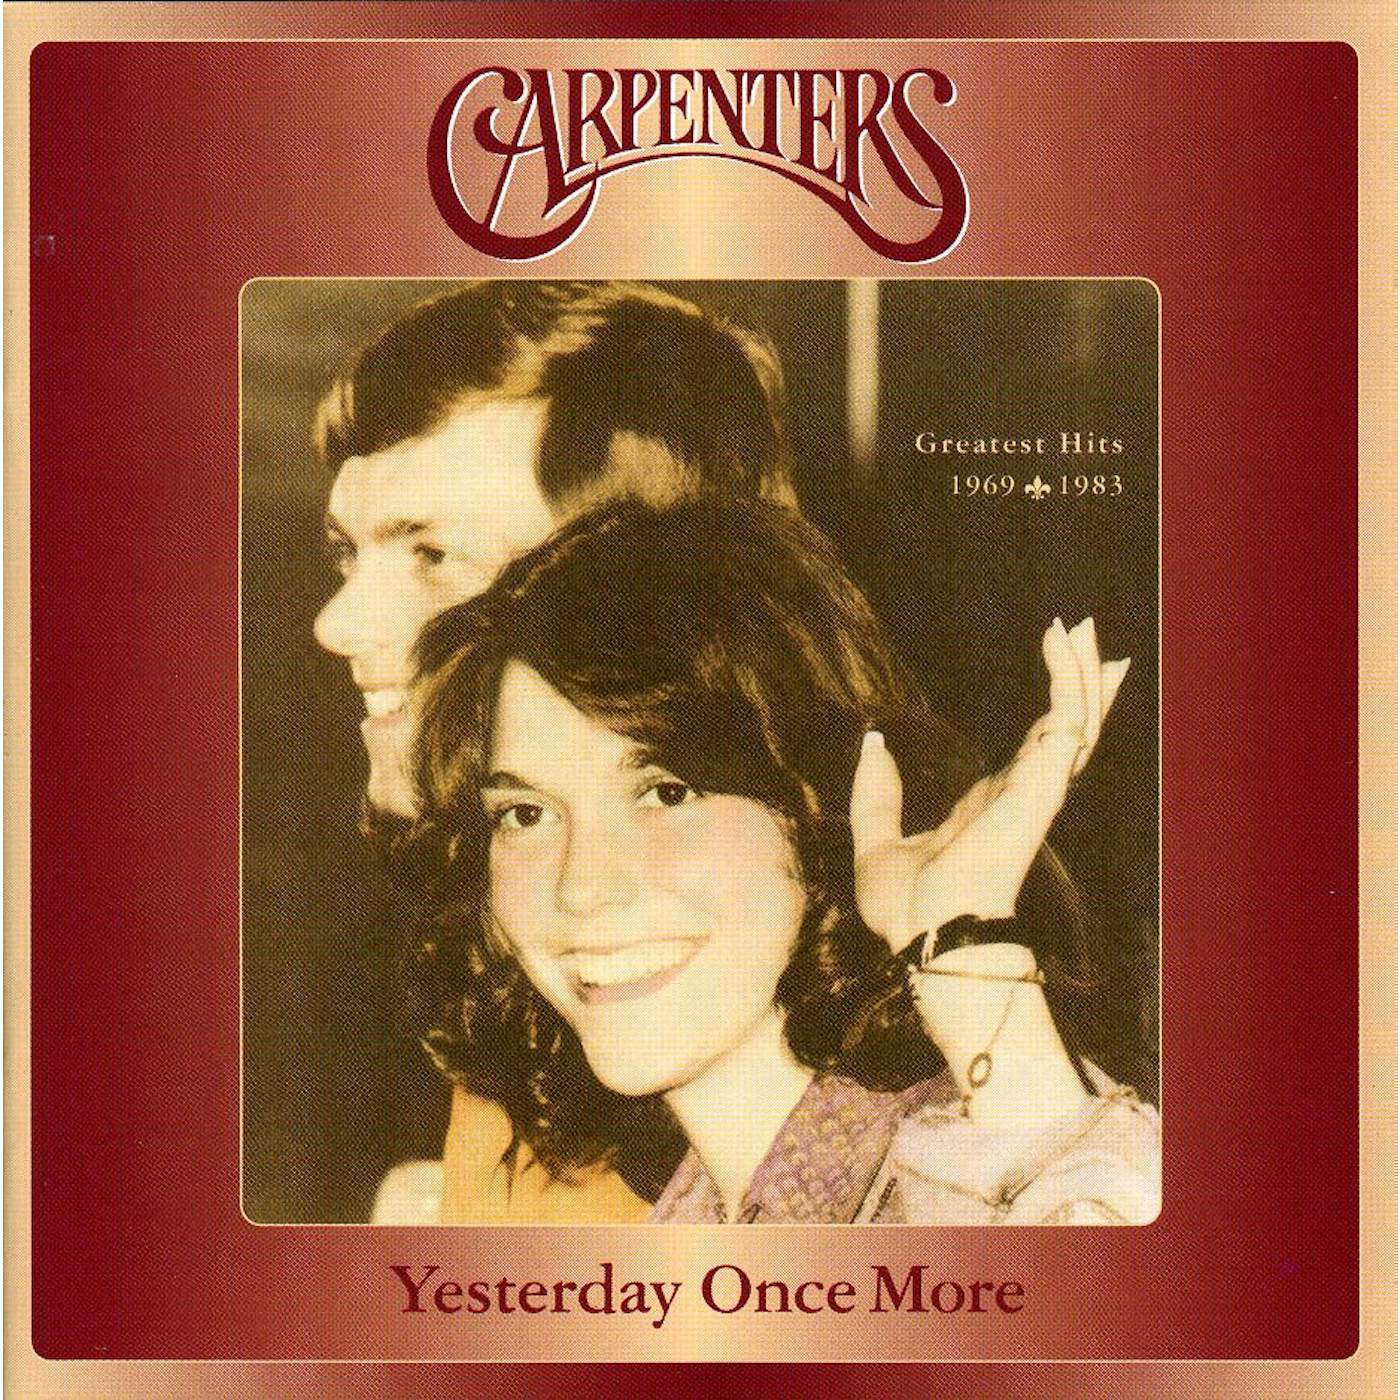 Carpenters YESTERDAY ONCE MORE CD